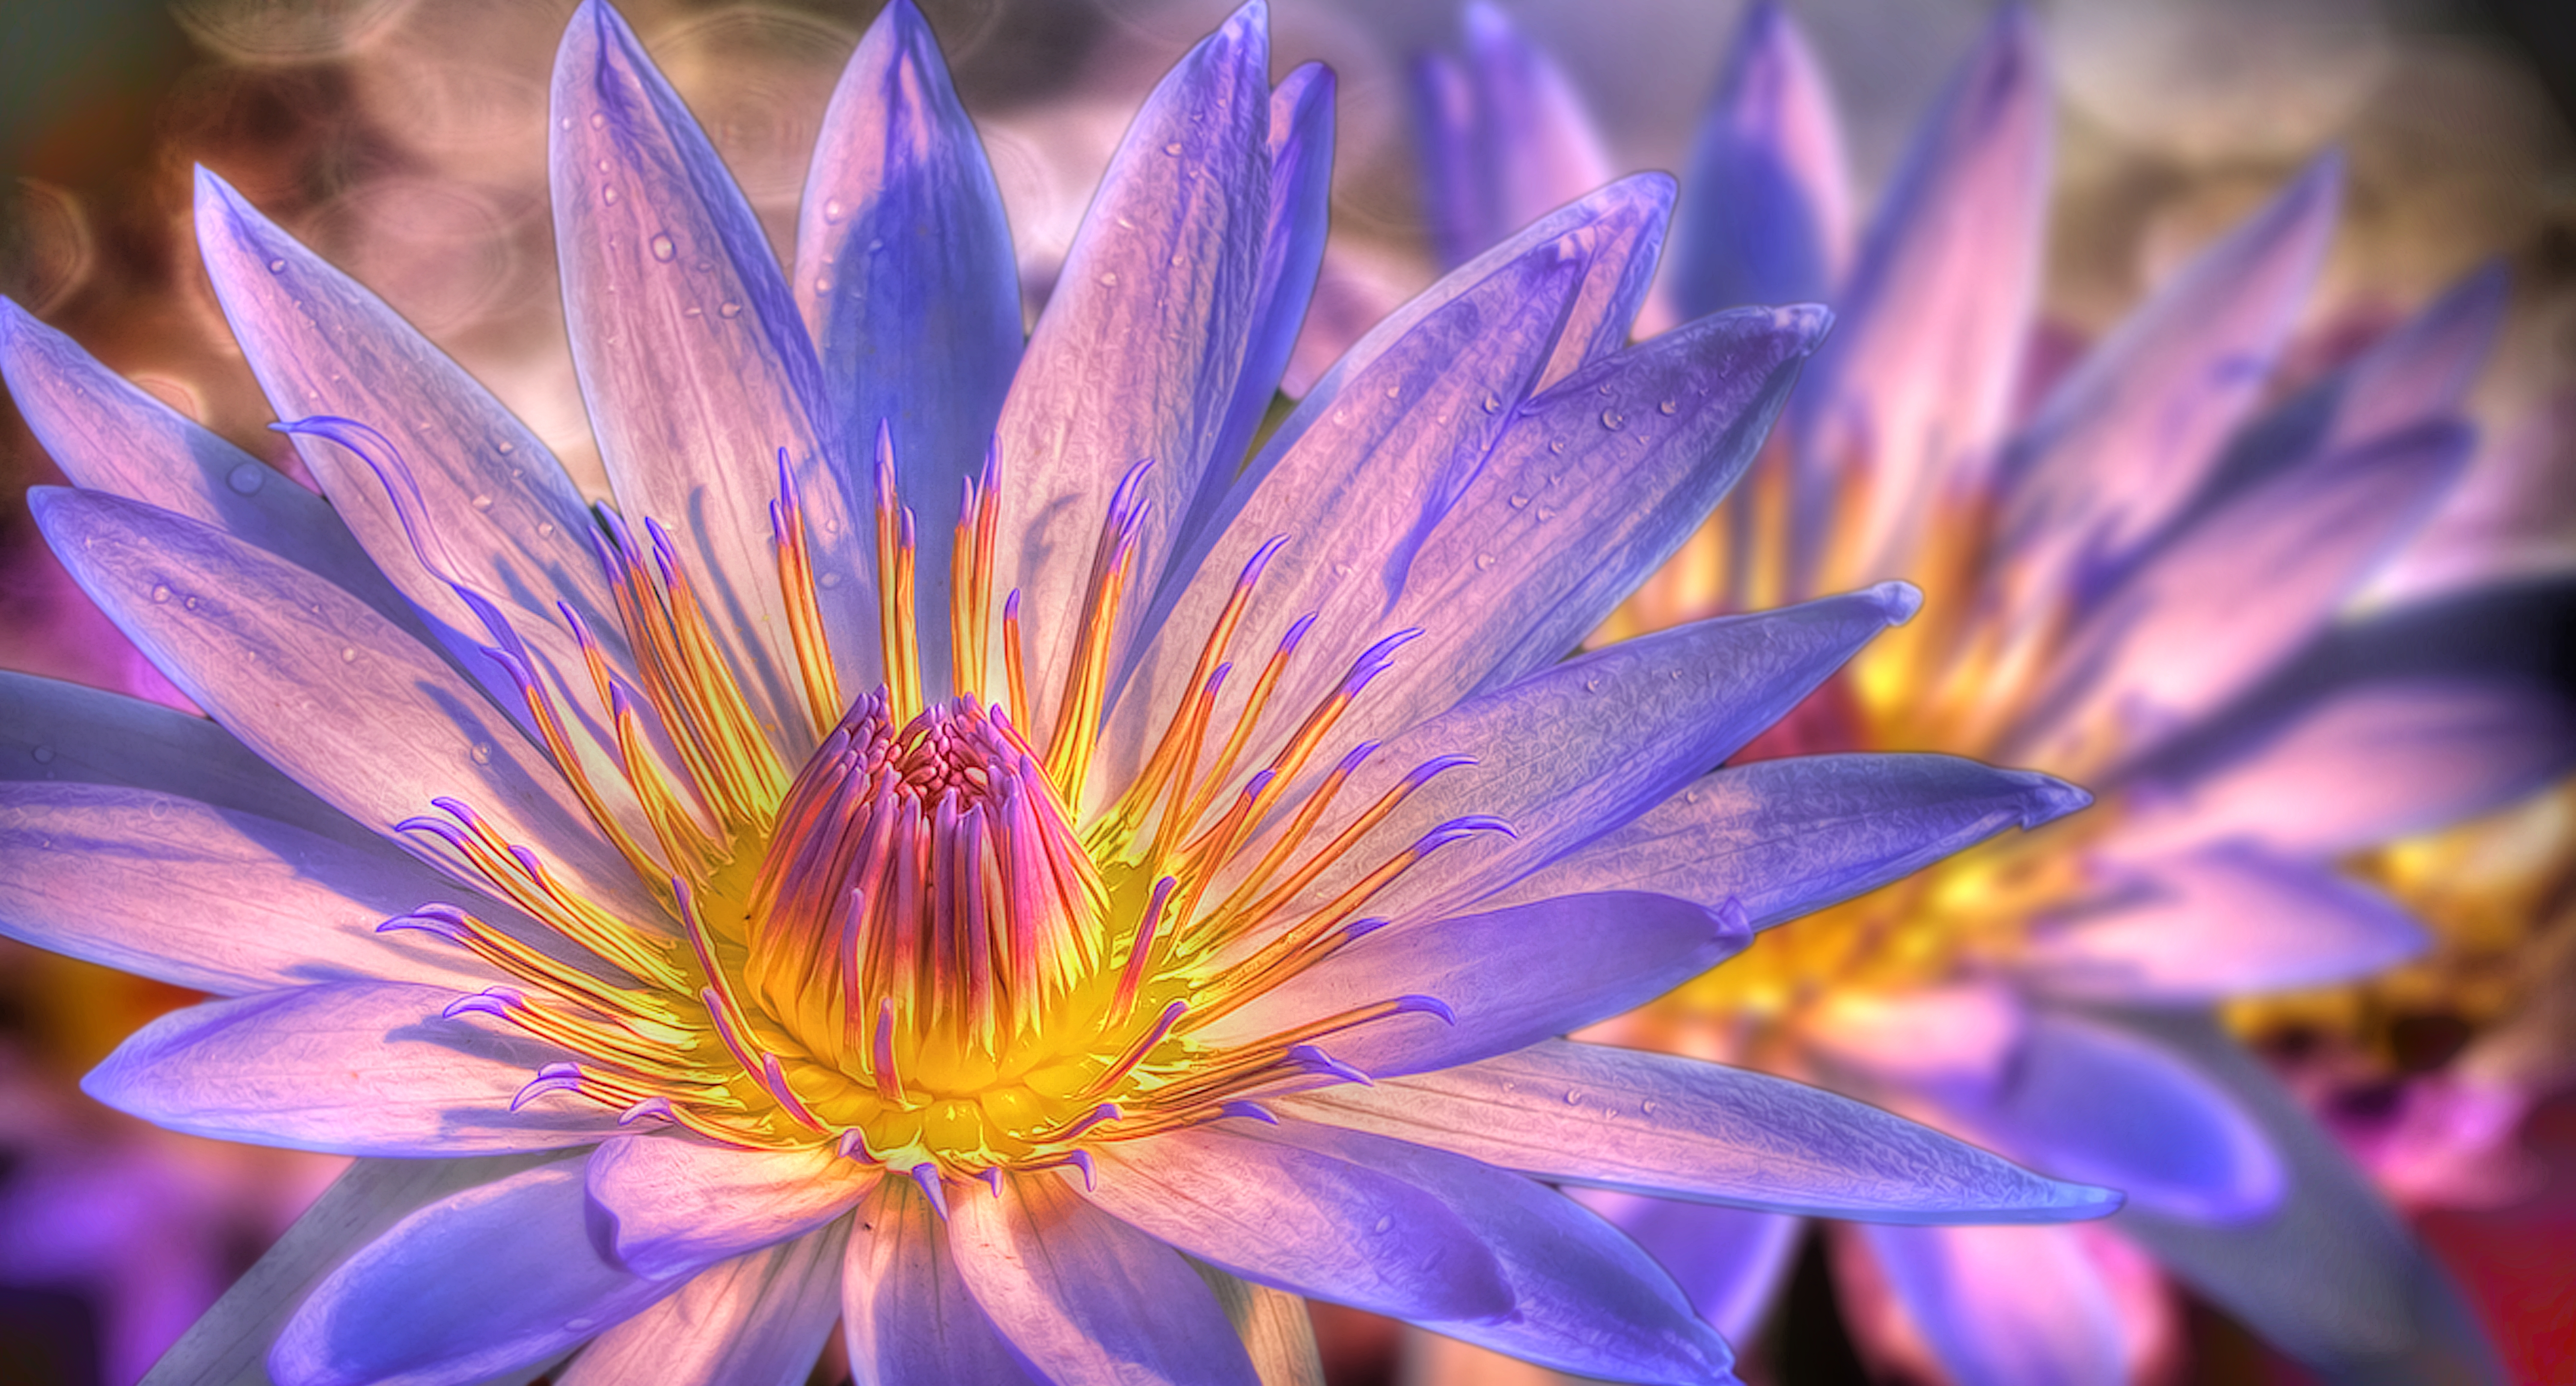 Water lilies in high resolution